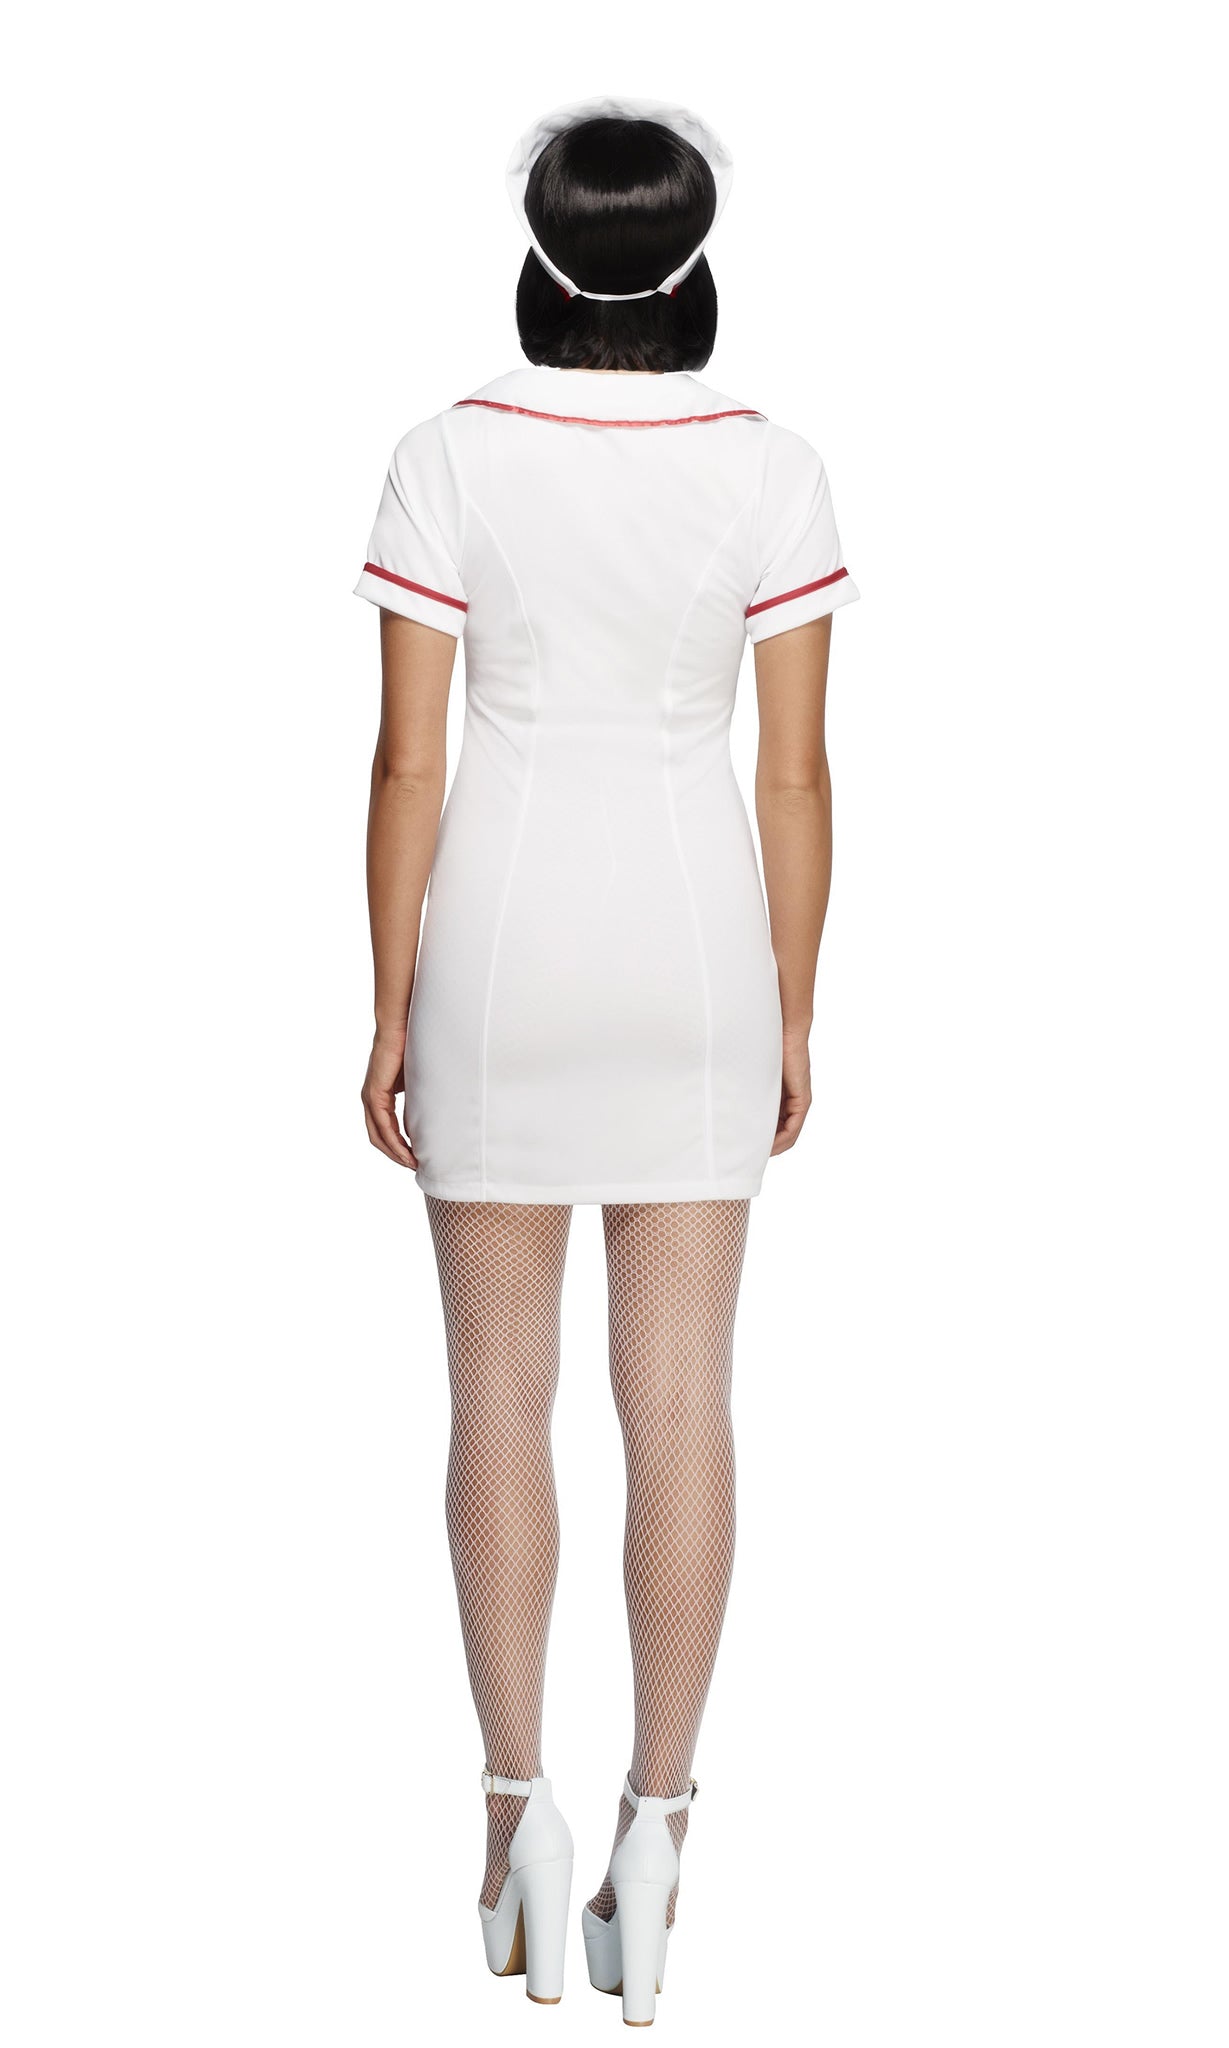 Back of short white nurse dress with matching hat